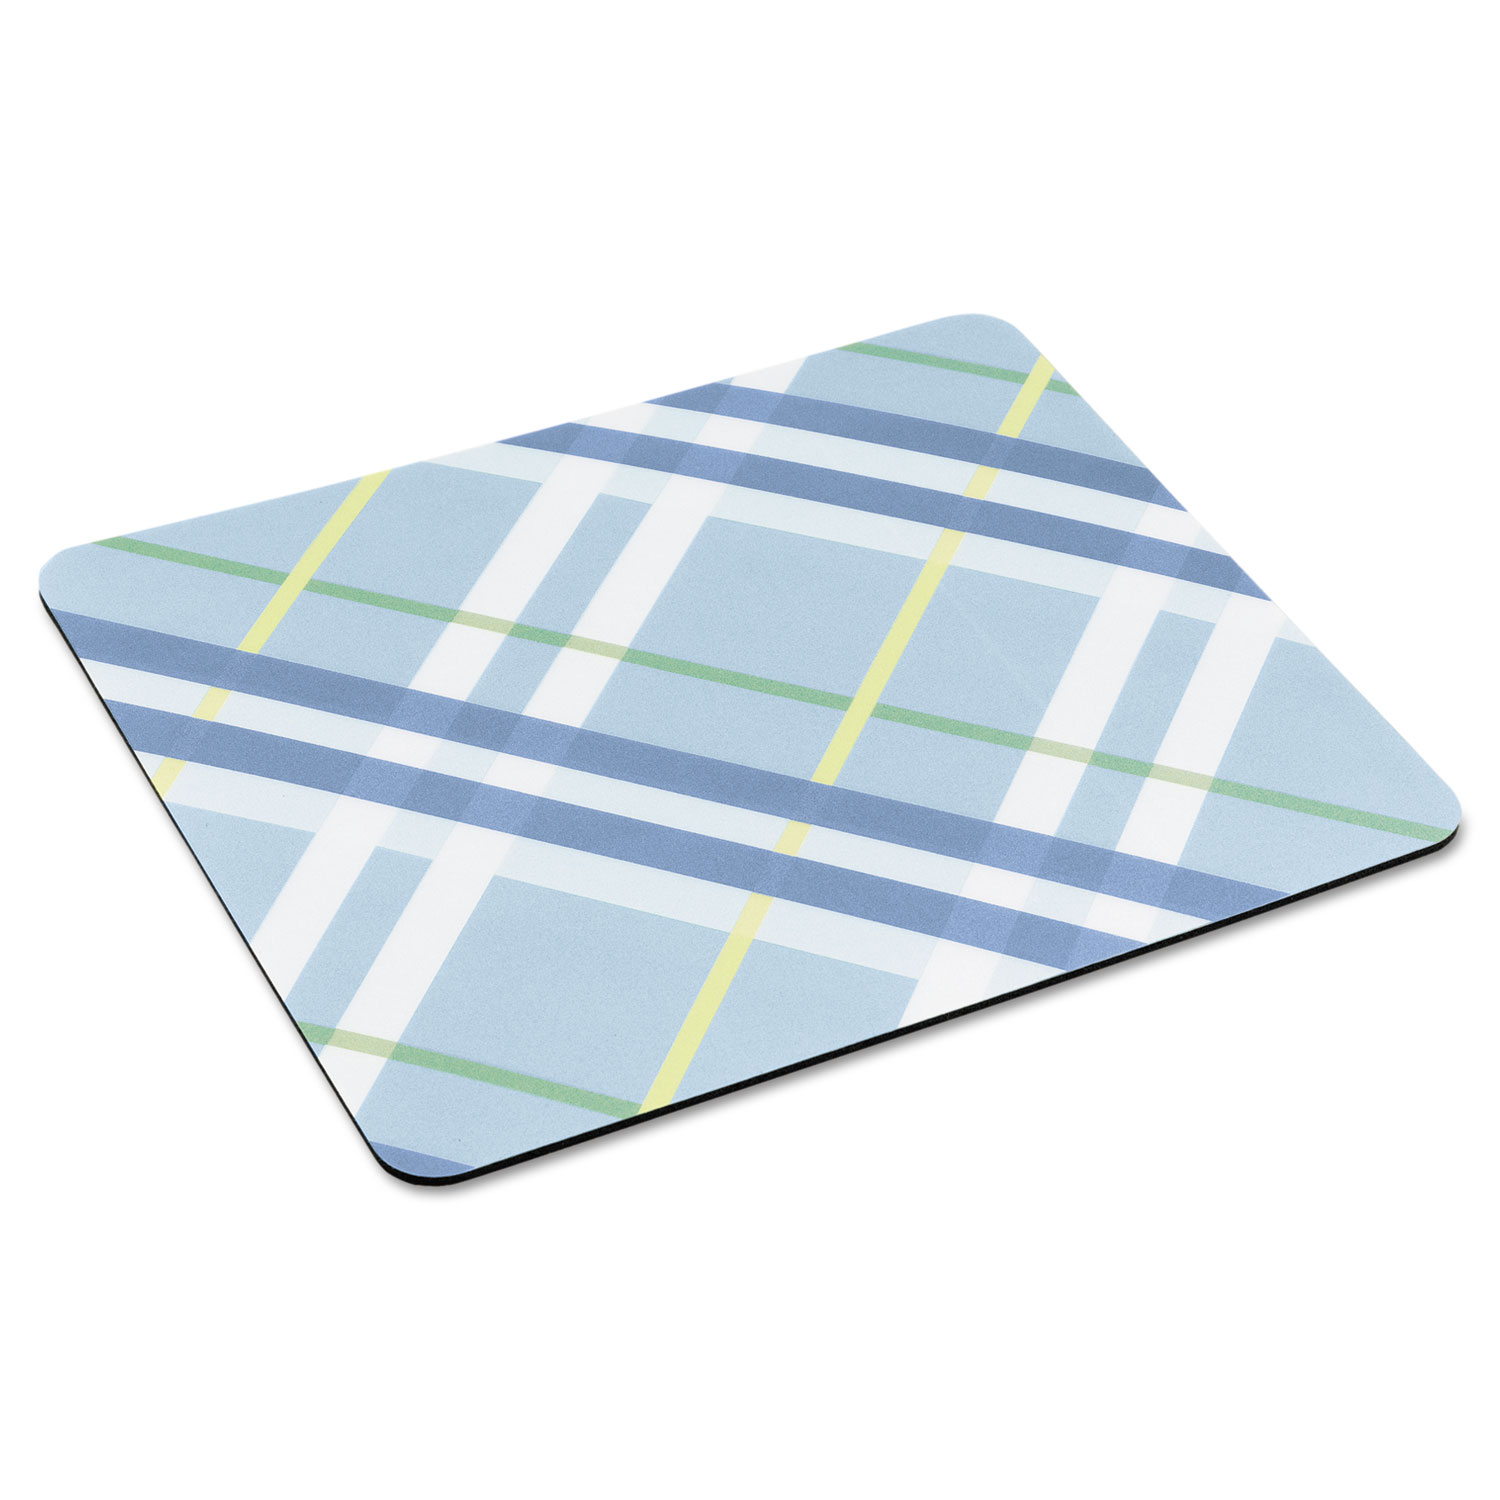 Mouse Pad with Precise Mousing Surface, 9 x 8 x 1/5, Plaid Design